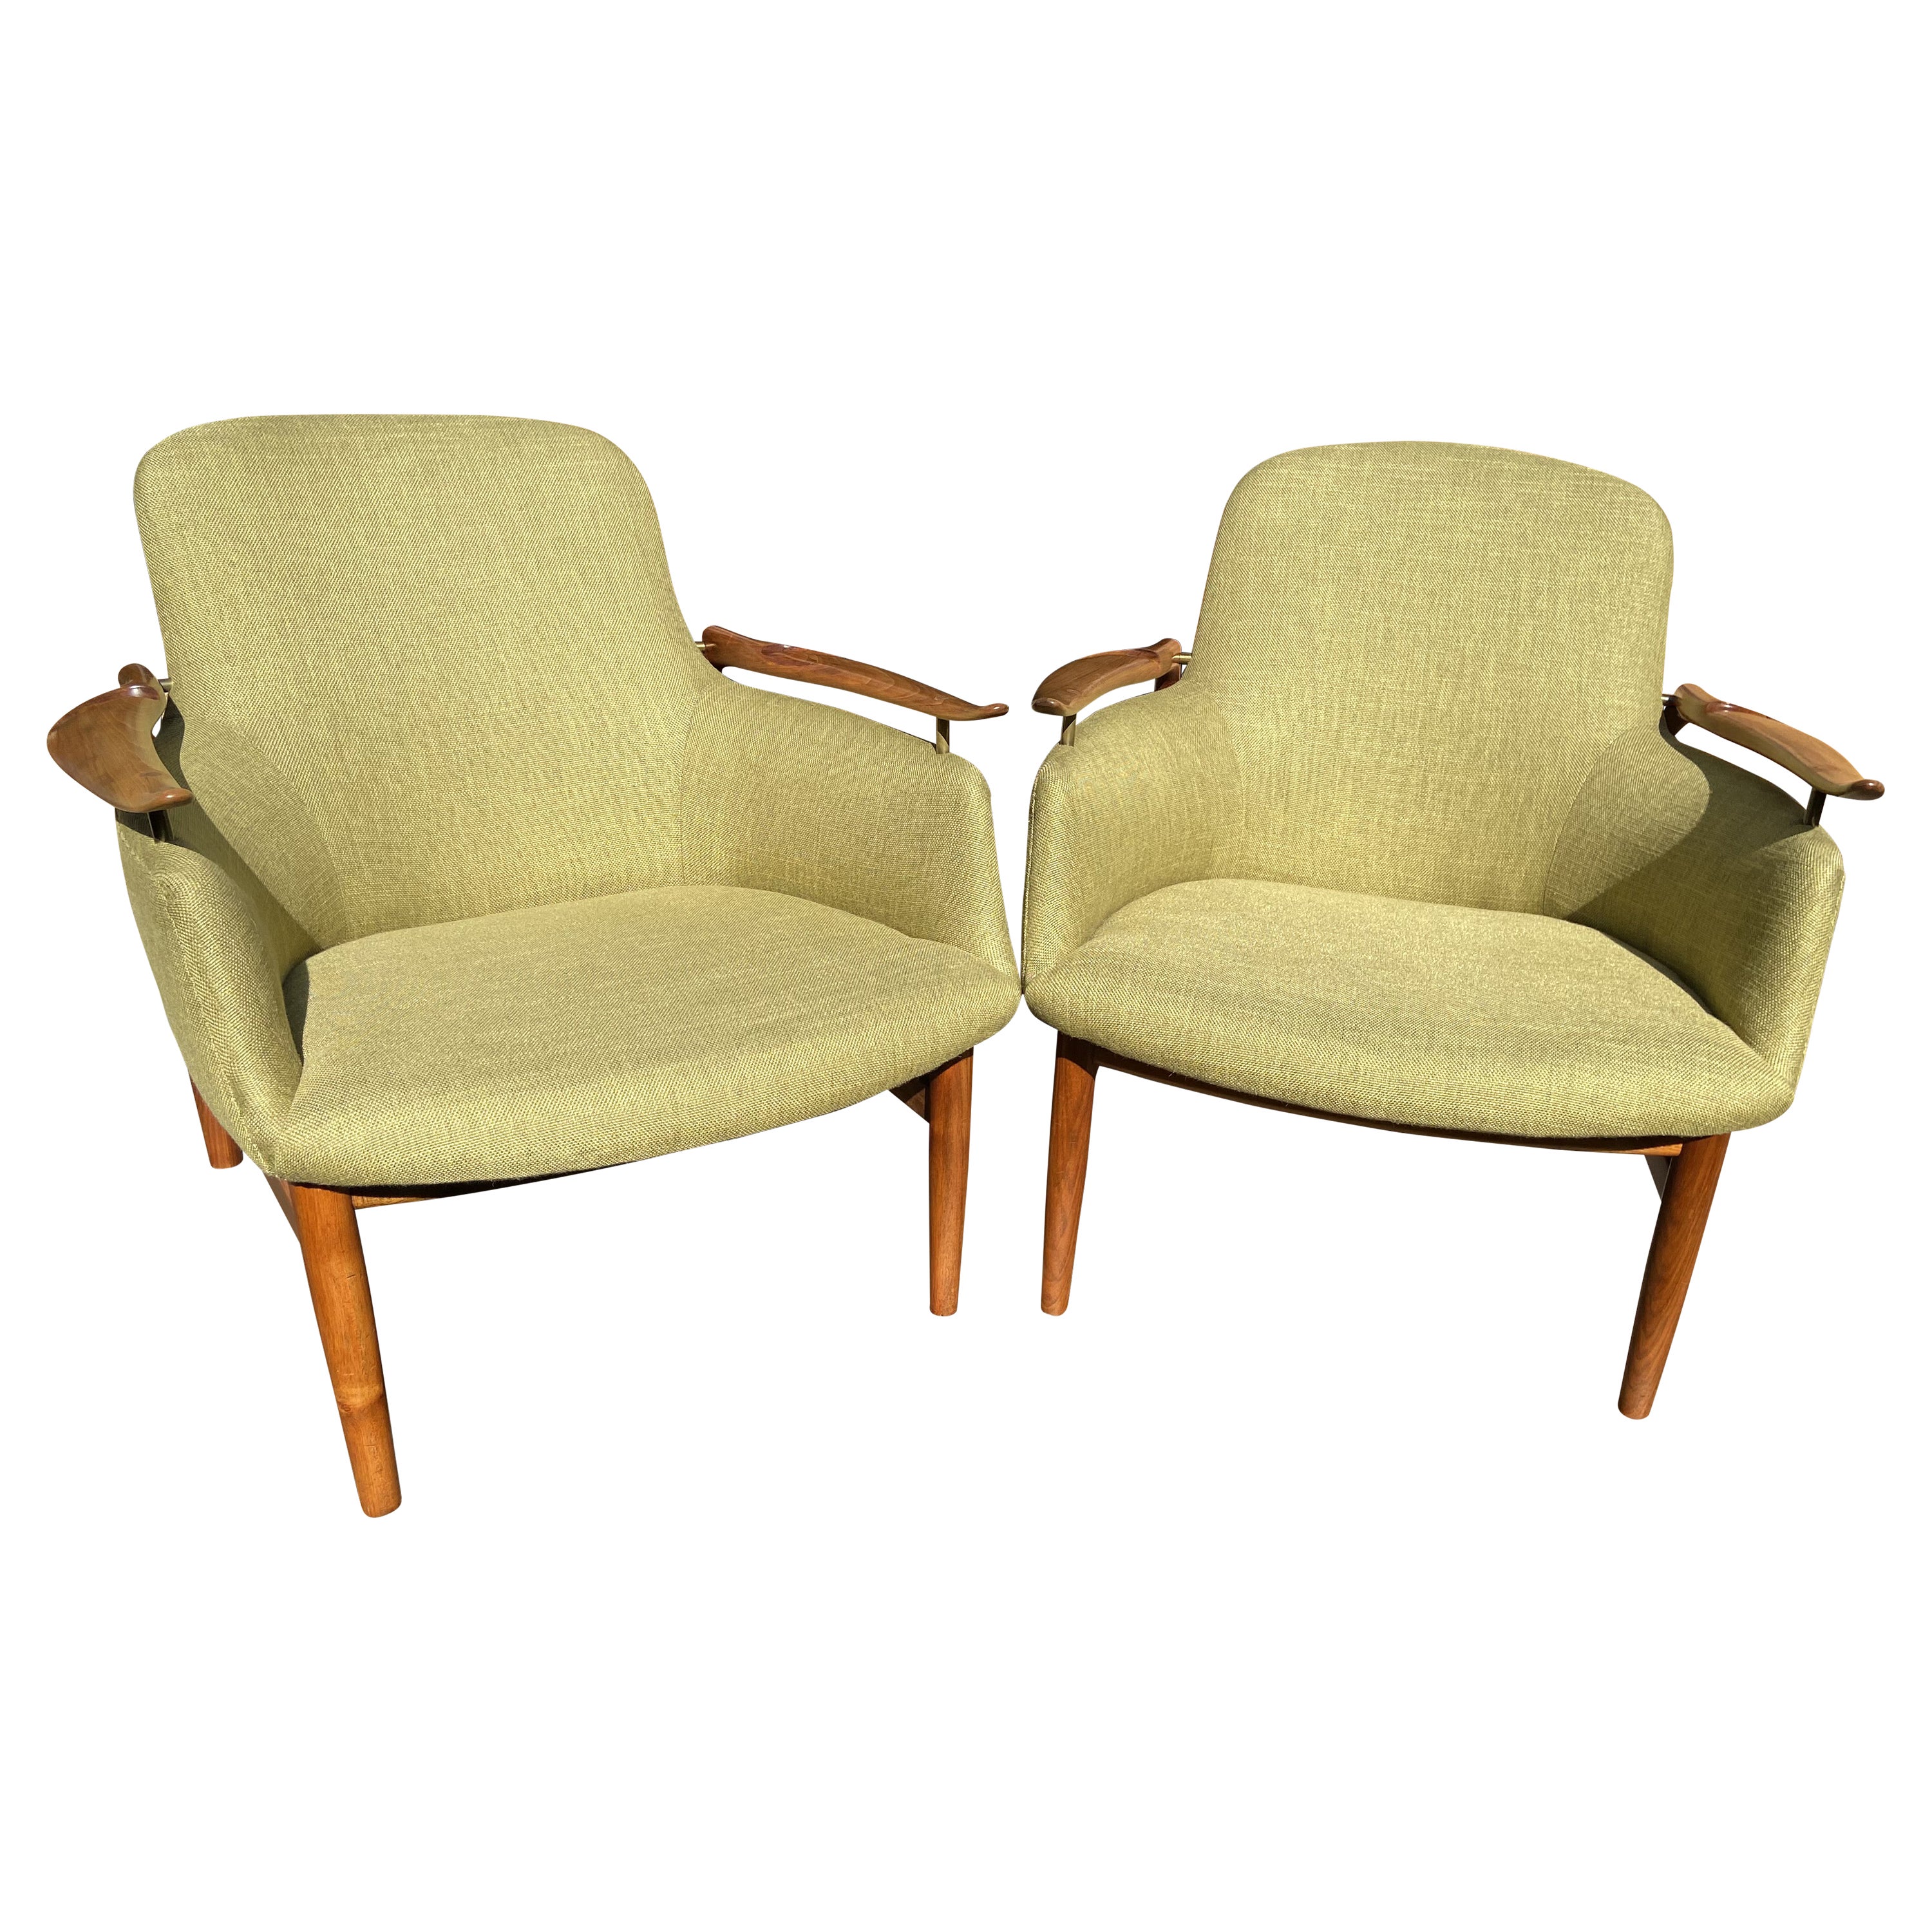 Fine Pair of NV53 Chairs by Finn Juhl for Niels Vodder